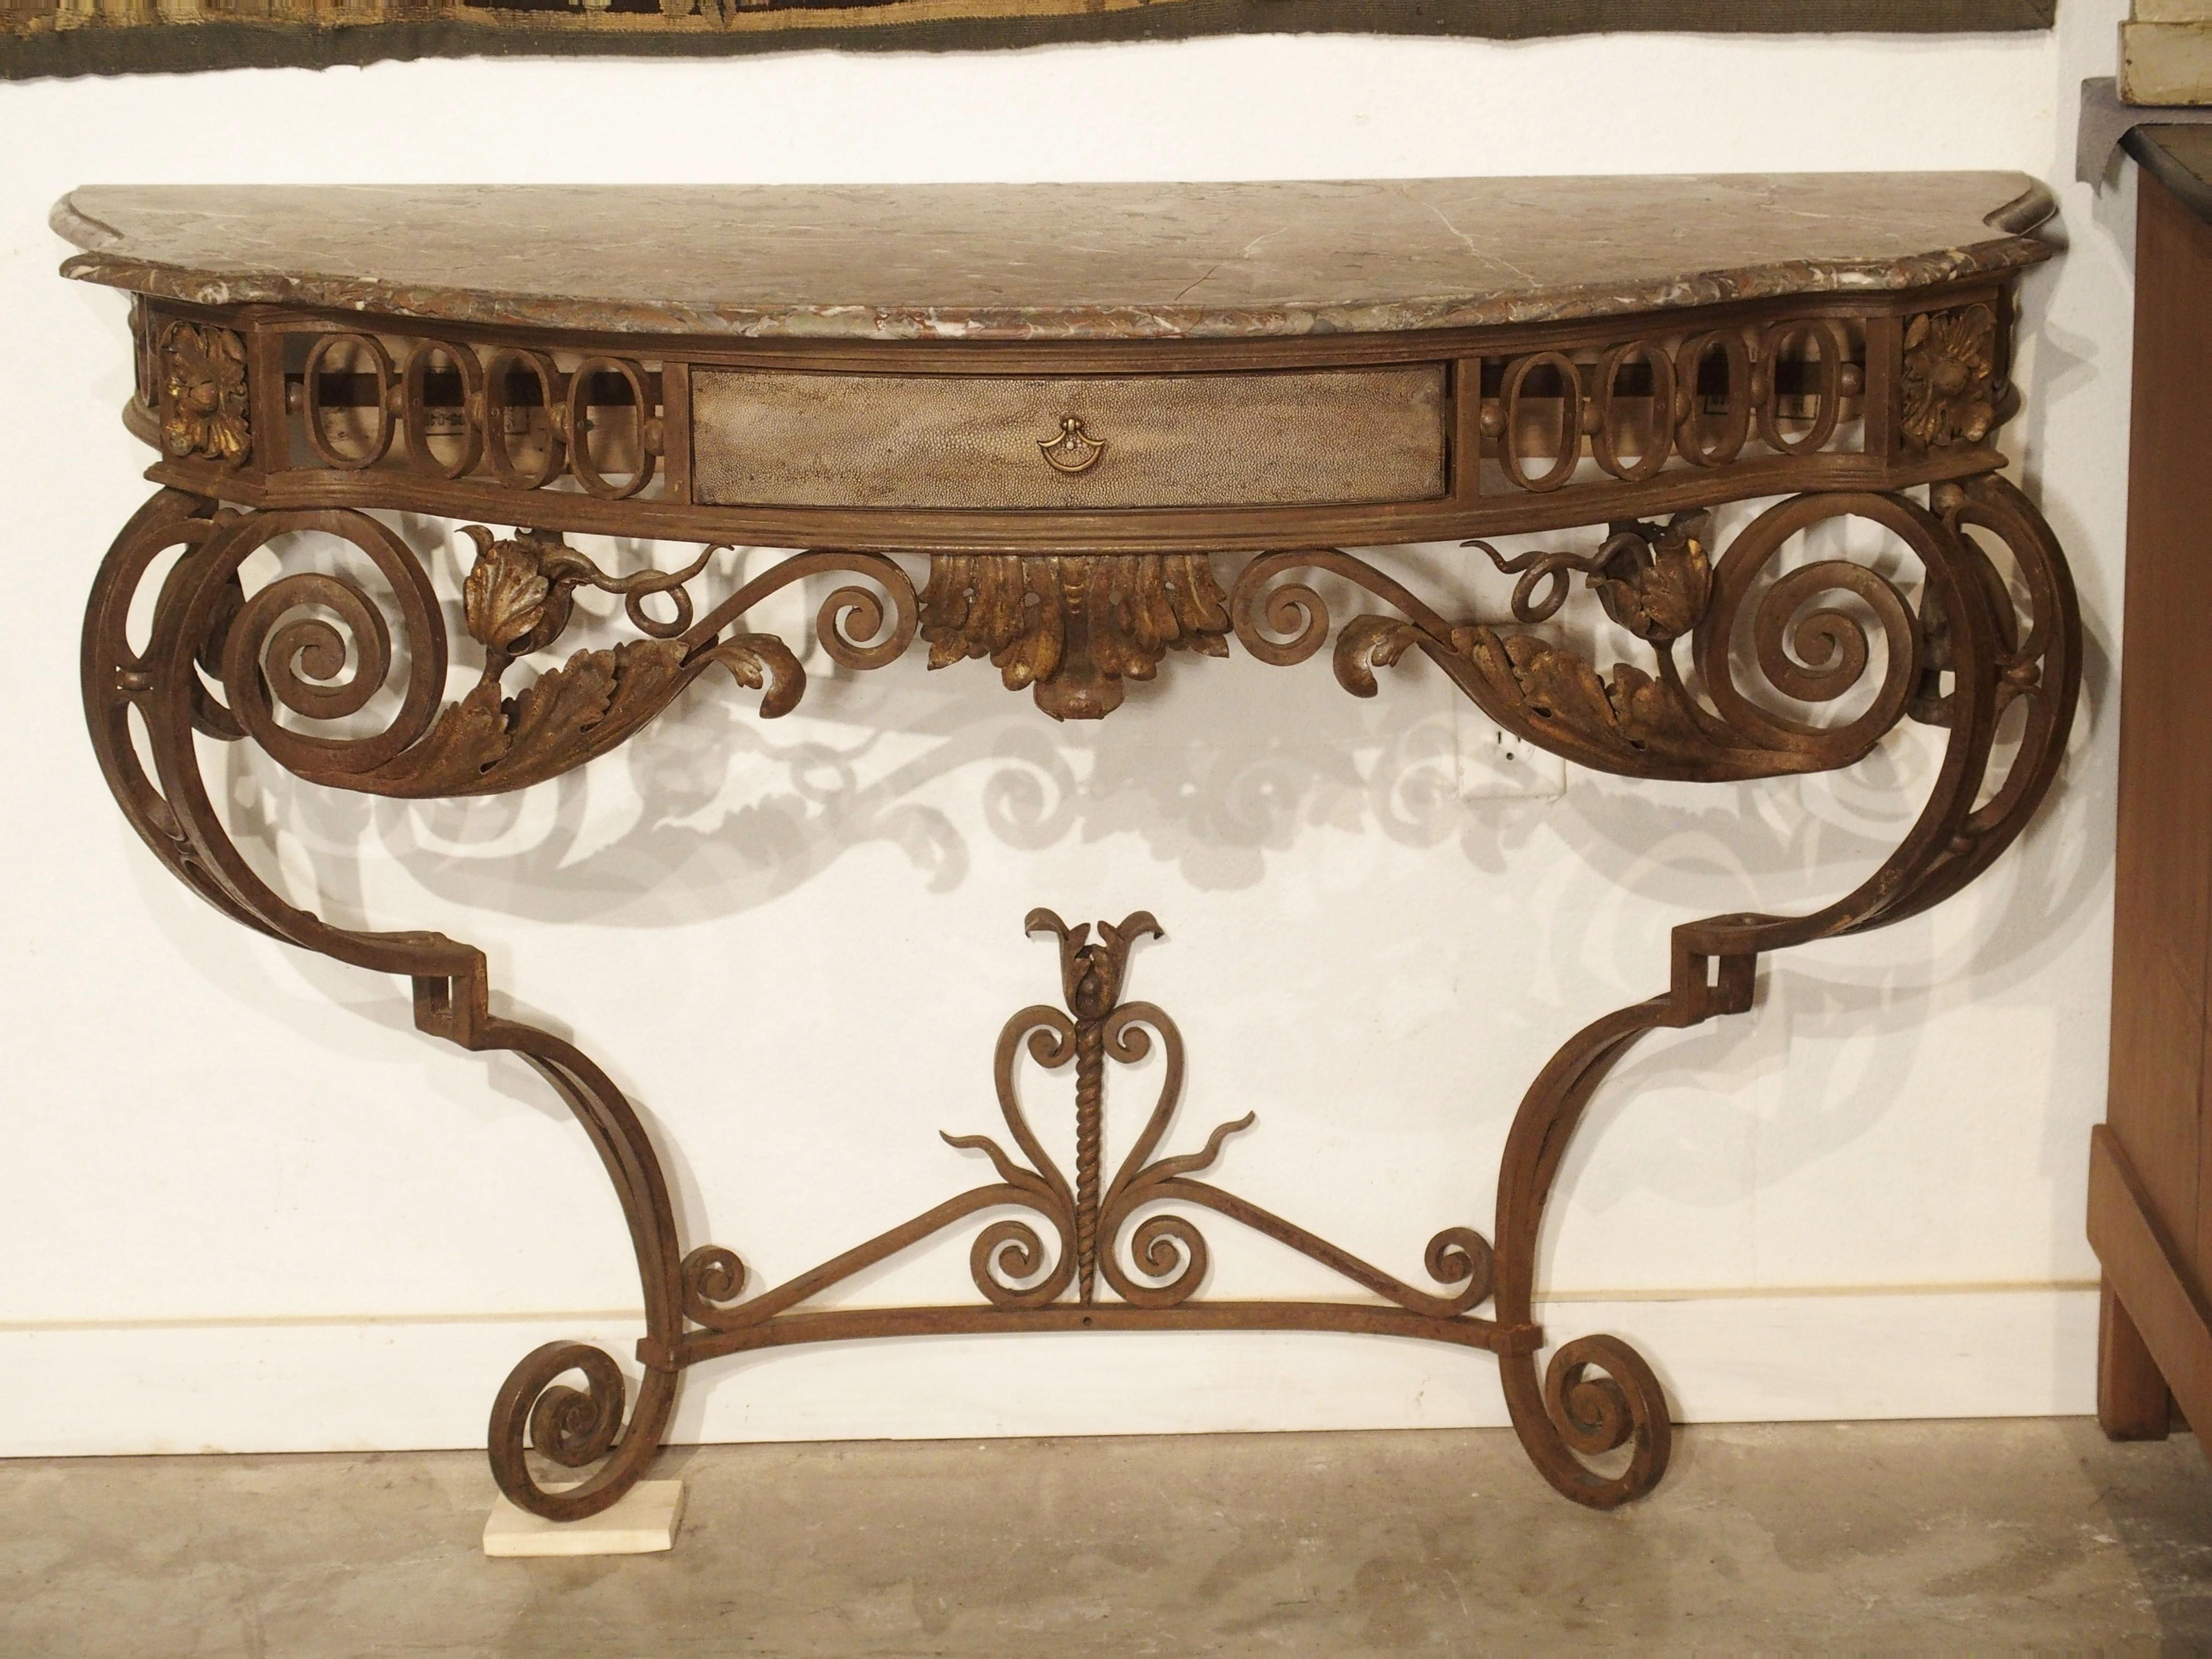 Hand-Carved Exceptional Pair of French Wrought Iron Consoles with Marble Tops, Circa 1880